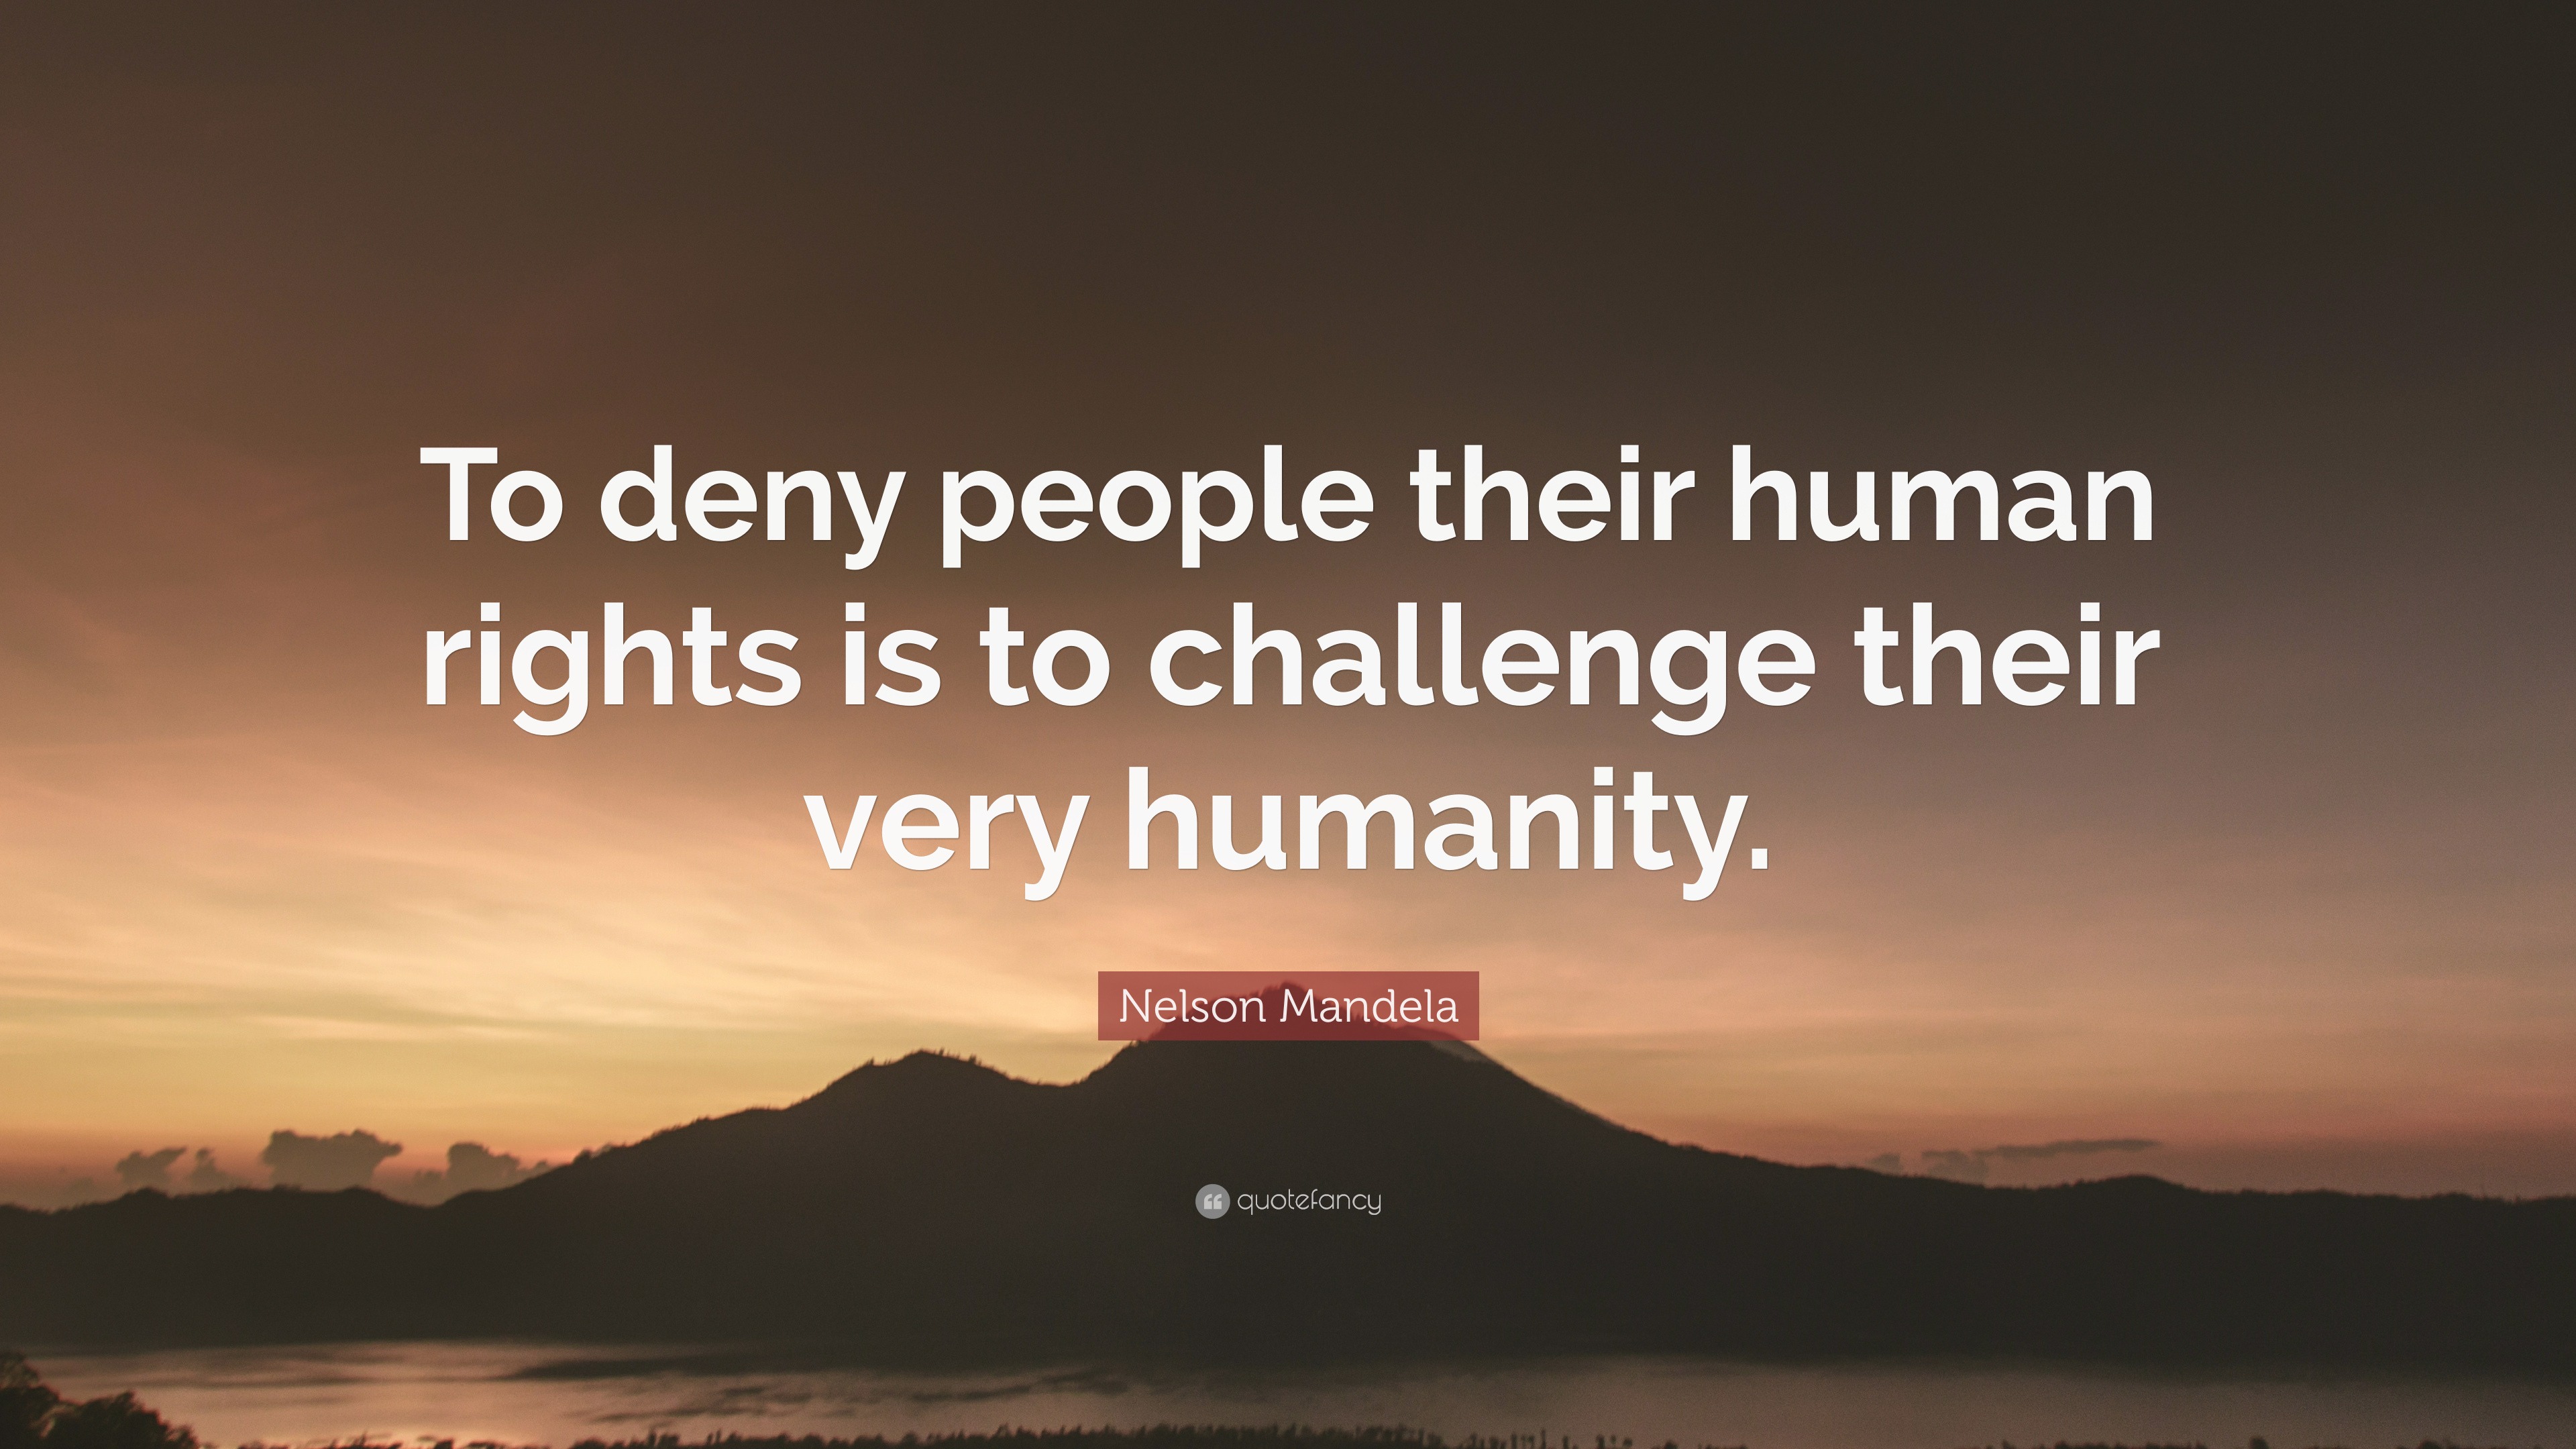 Nelson Mandela Quote: “To deny people their human rights is to